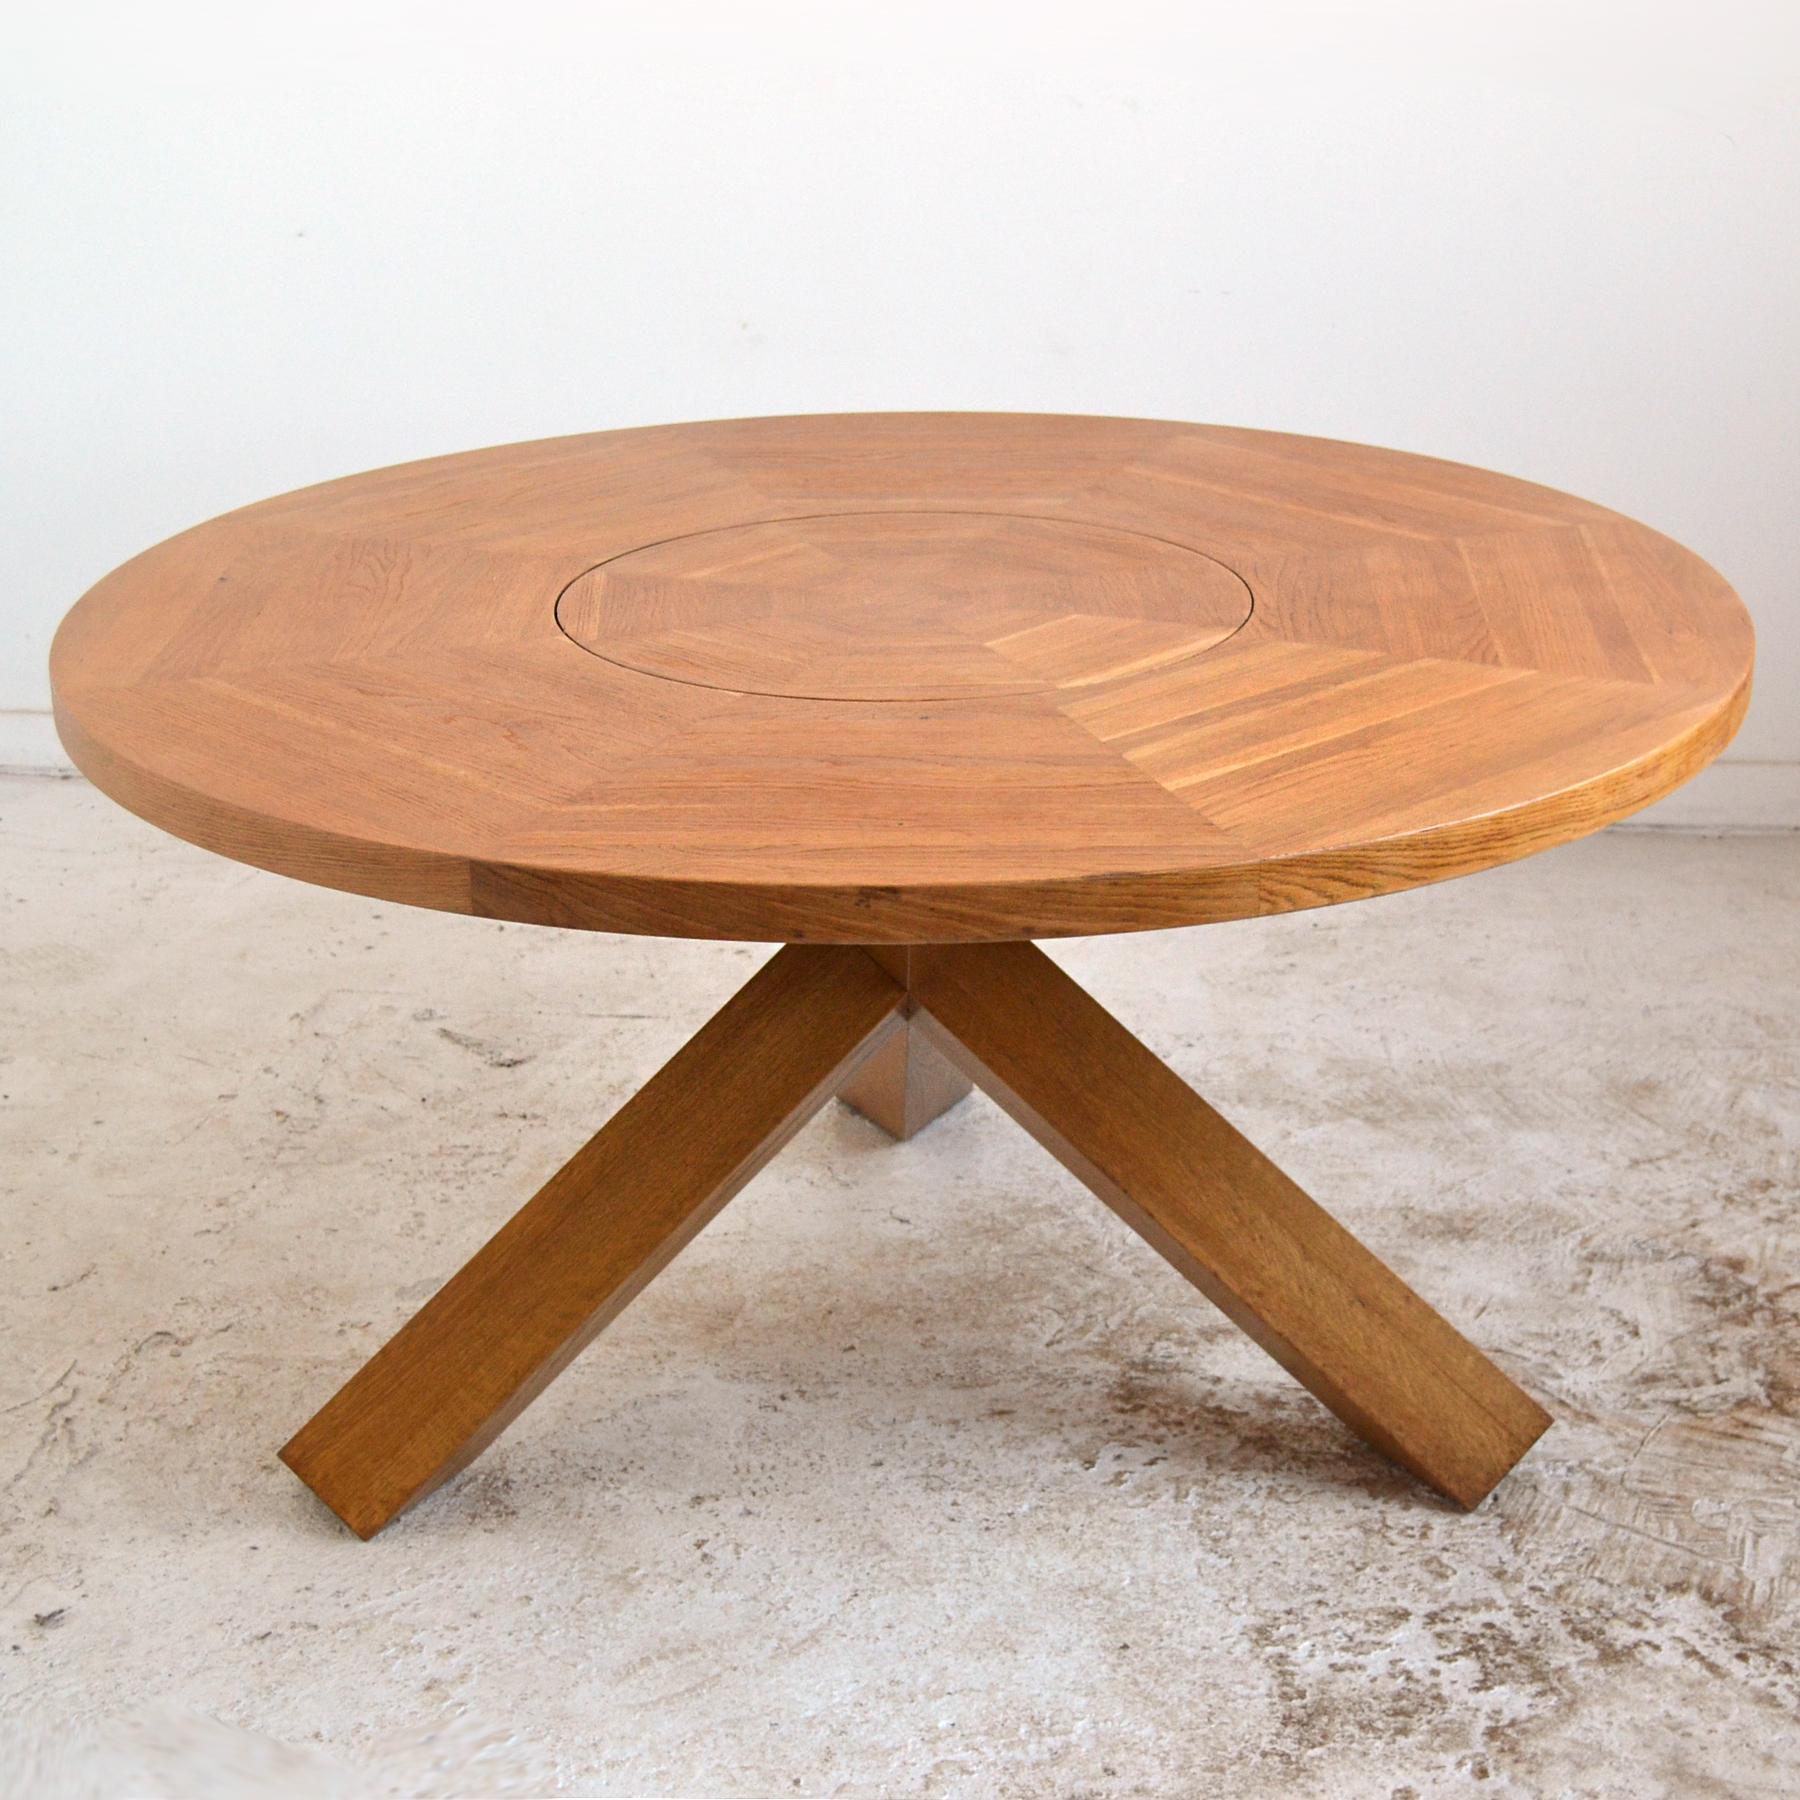 Crafted of solid oak, this large La Rotonda dining table designed in 1977 by Mario Bellini for Cassina has an uncommon and useful feature– a lazy susan built into the center of the top. The striking design has a jacks-form base which supports the